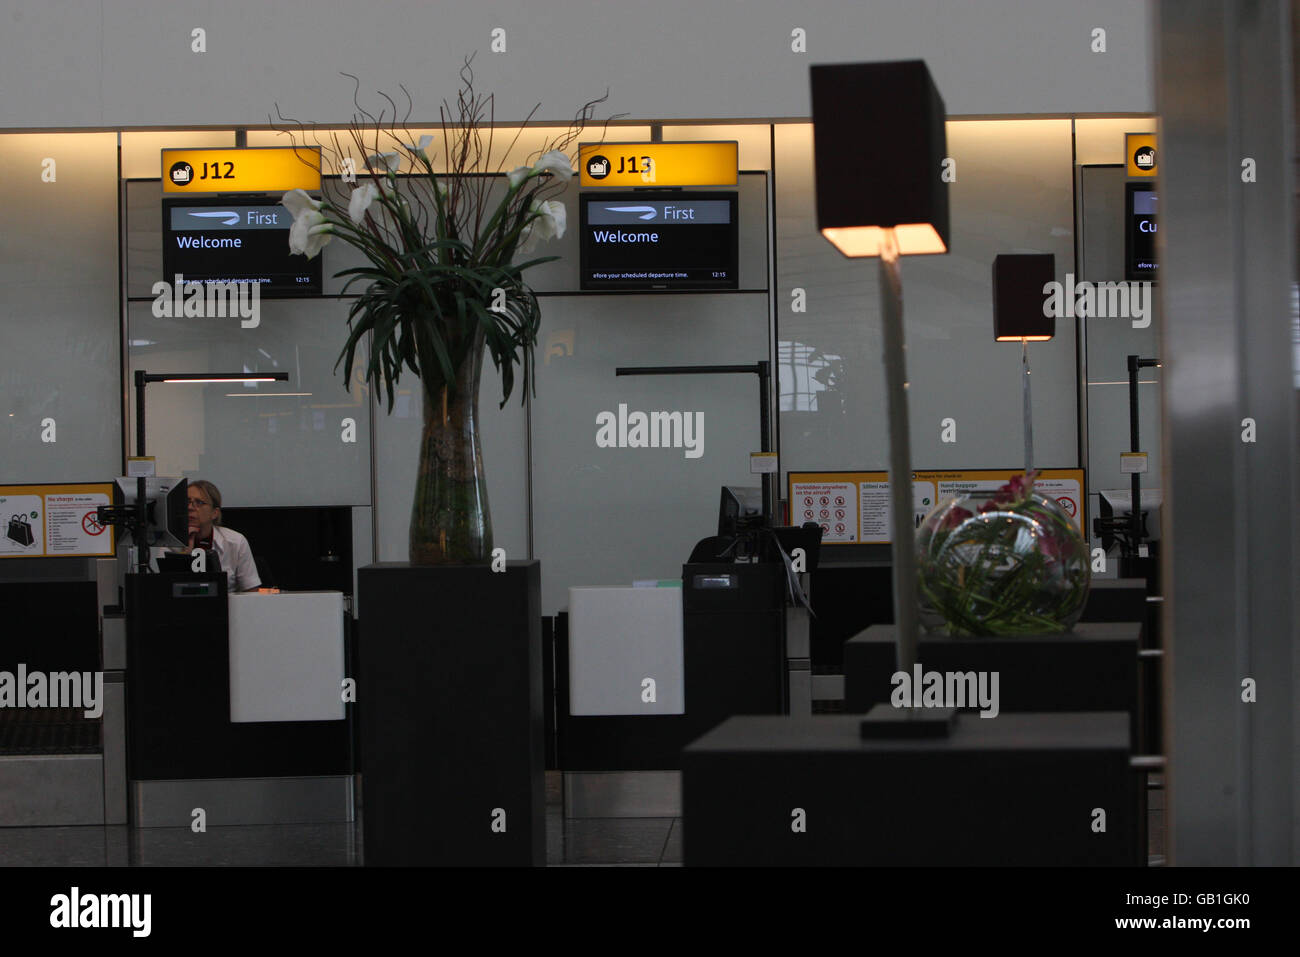 The British Airways first class check-in area in departures of Terminal 5 at London's Heathrow Airport. Stock Photo